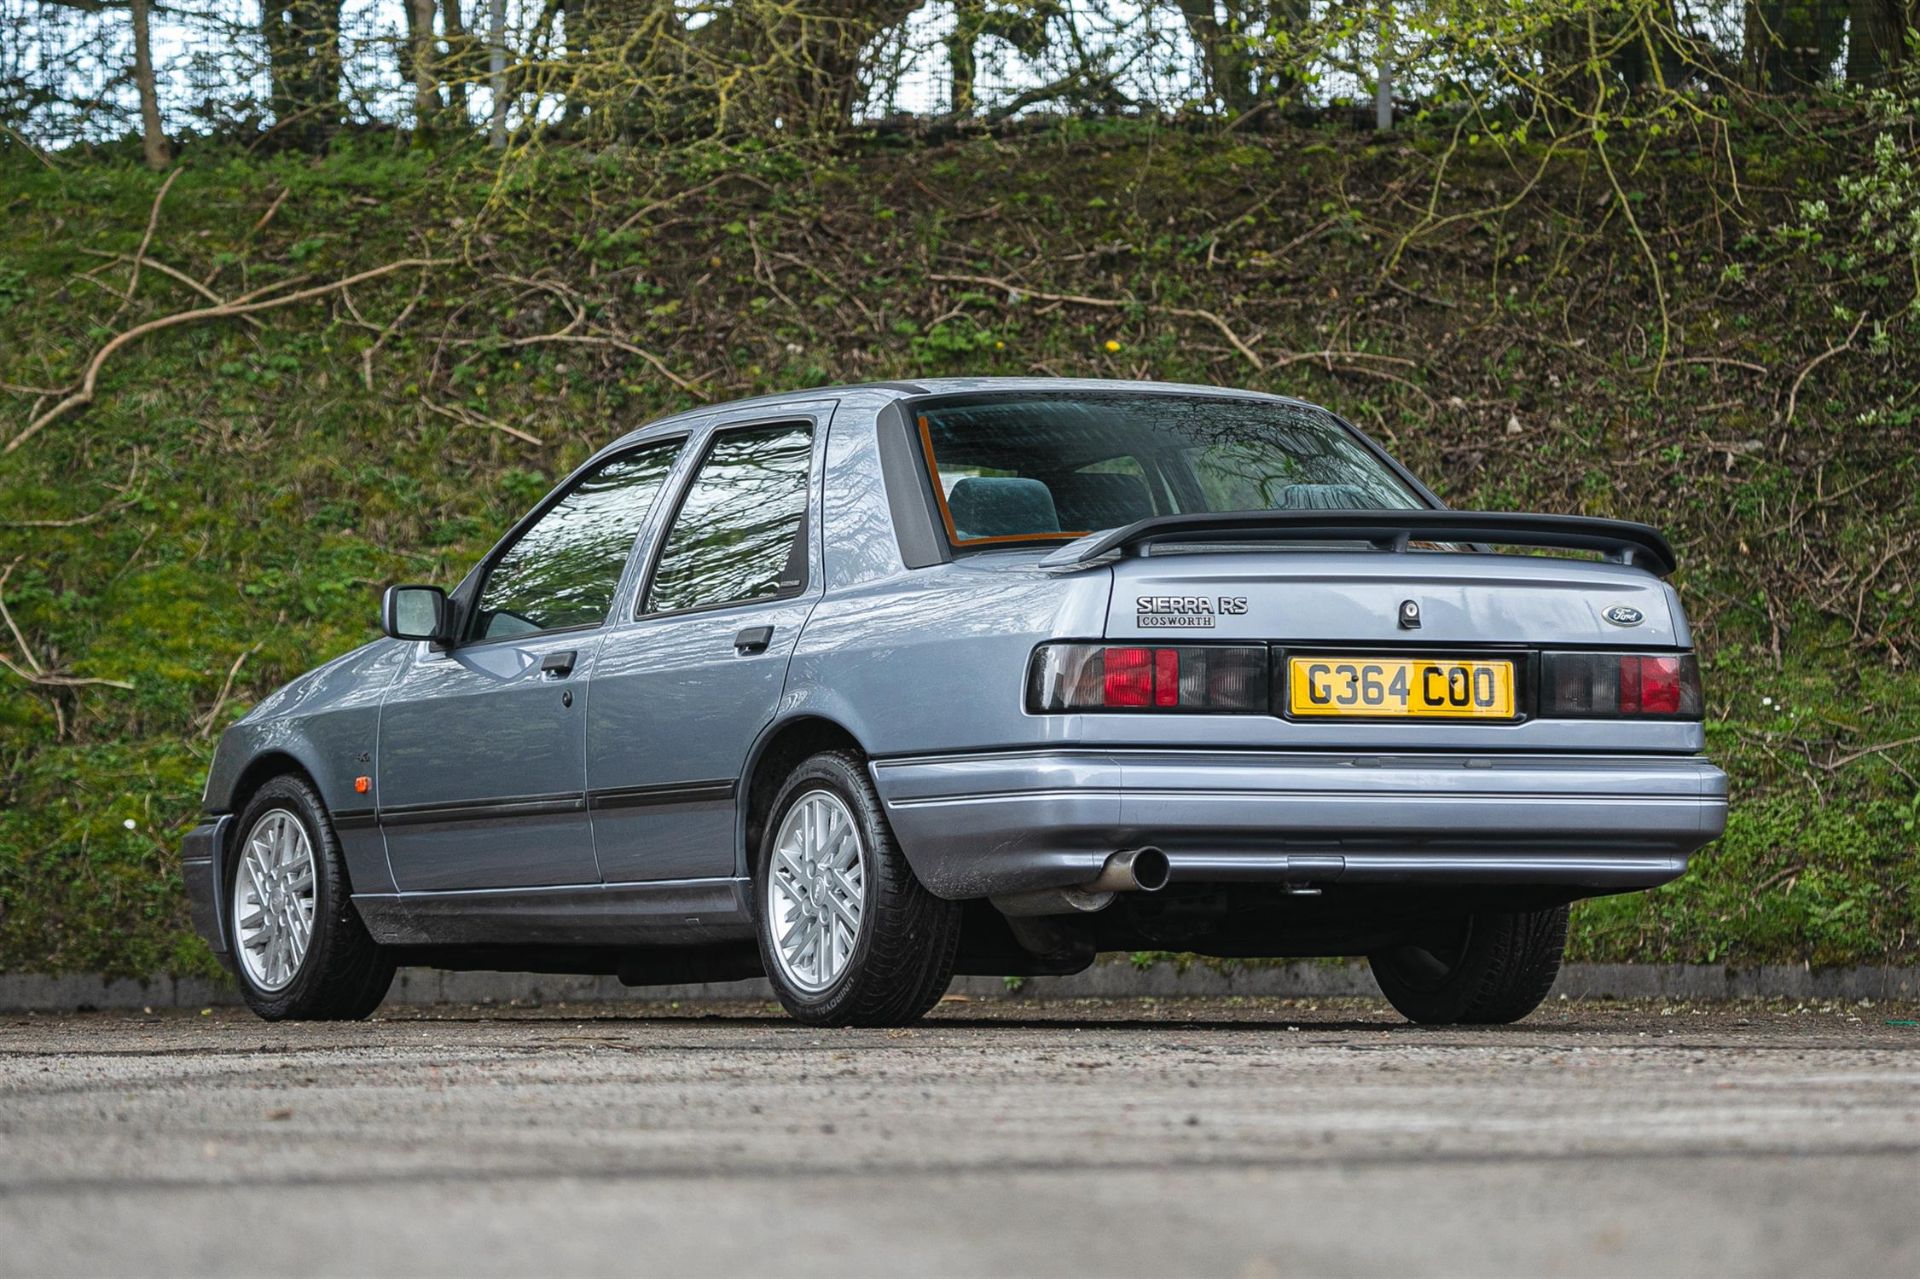 1990 Ford Sierra Sapphire RS Cosworth 4x4 - ex-Press Car - Image 4 of 10